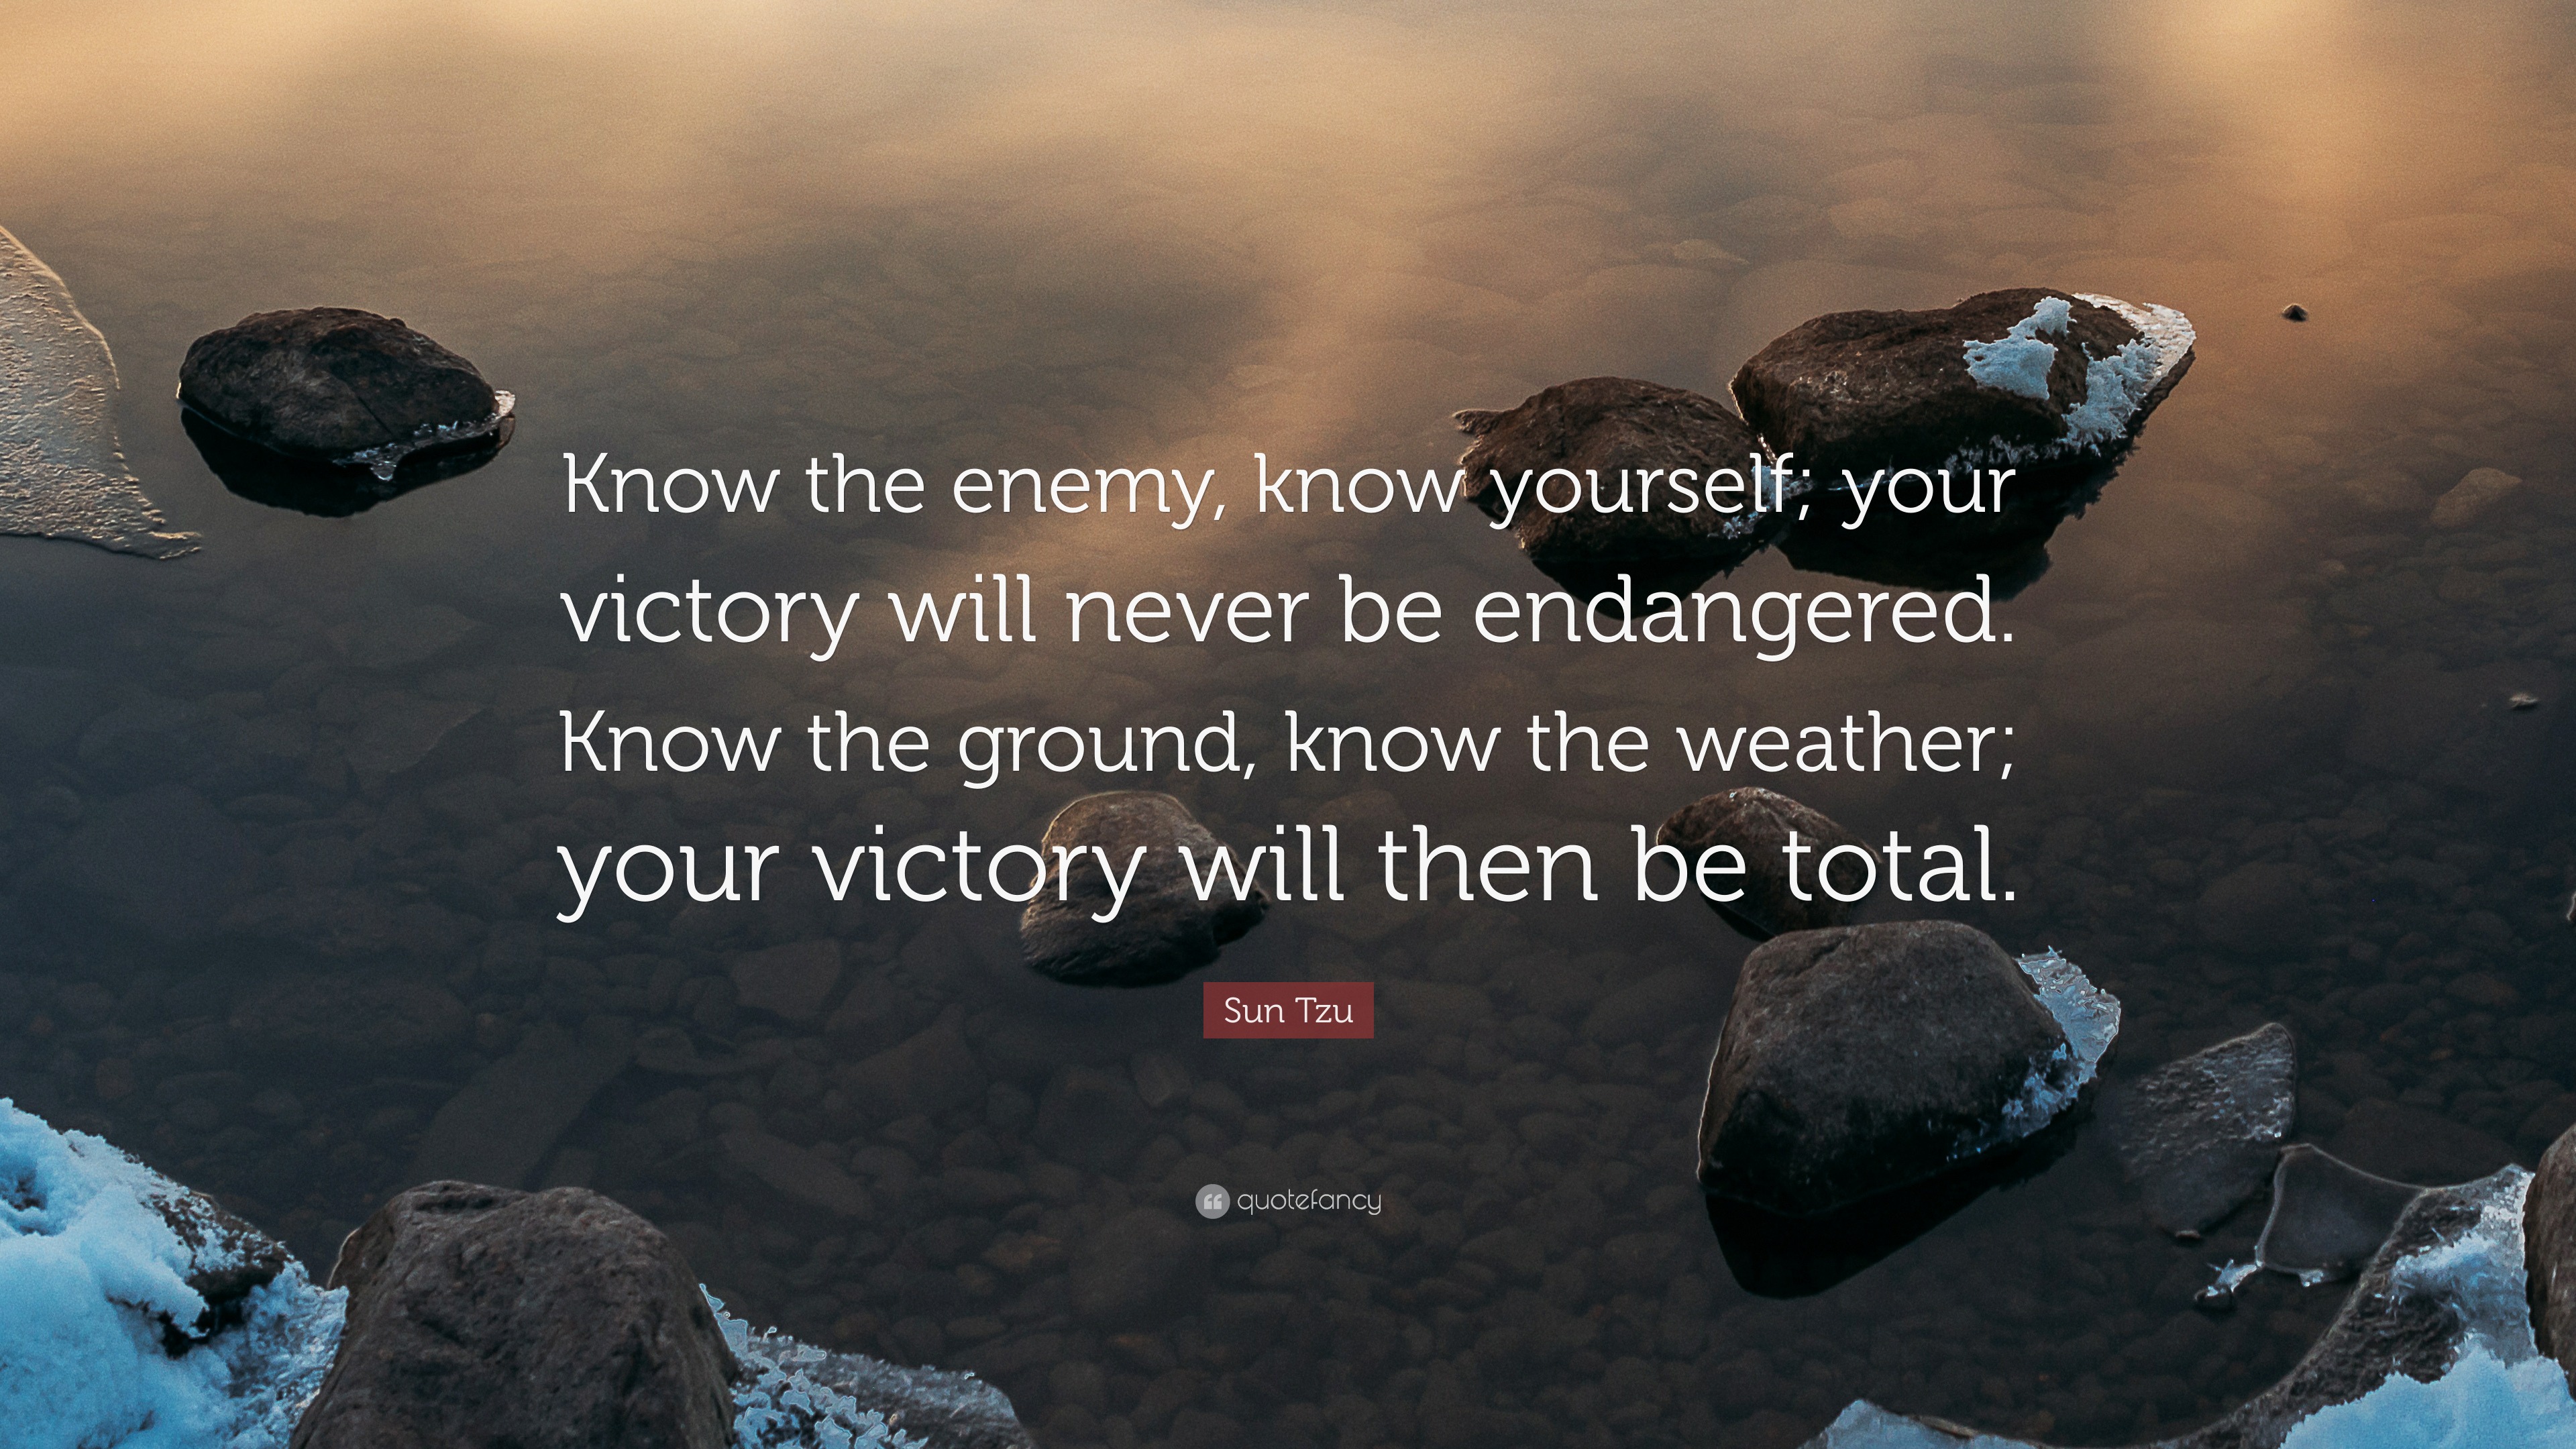 Sun Tzu Quote: “Know the enemy, know yourself; your victory will never